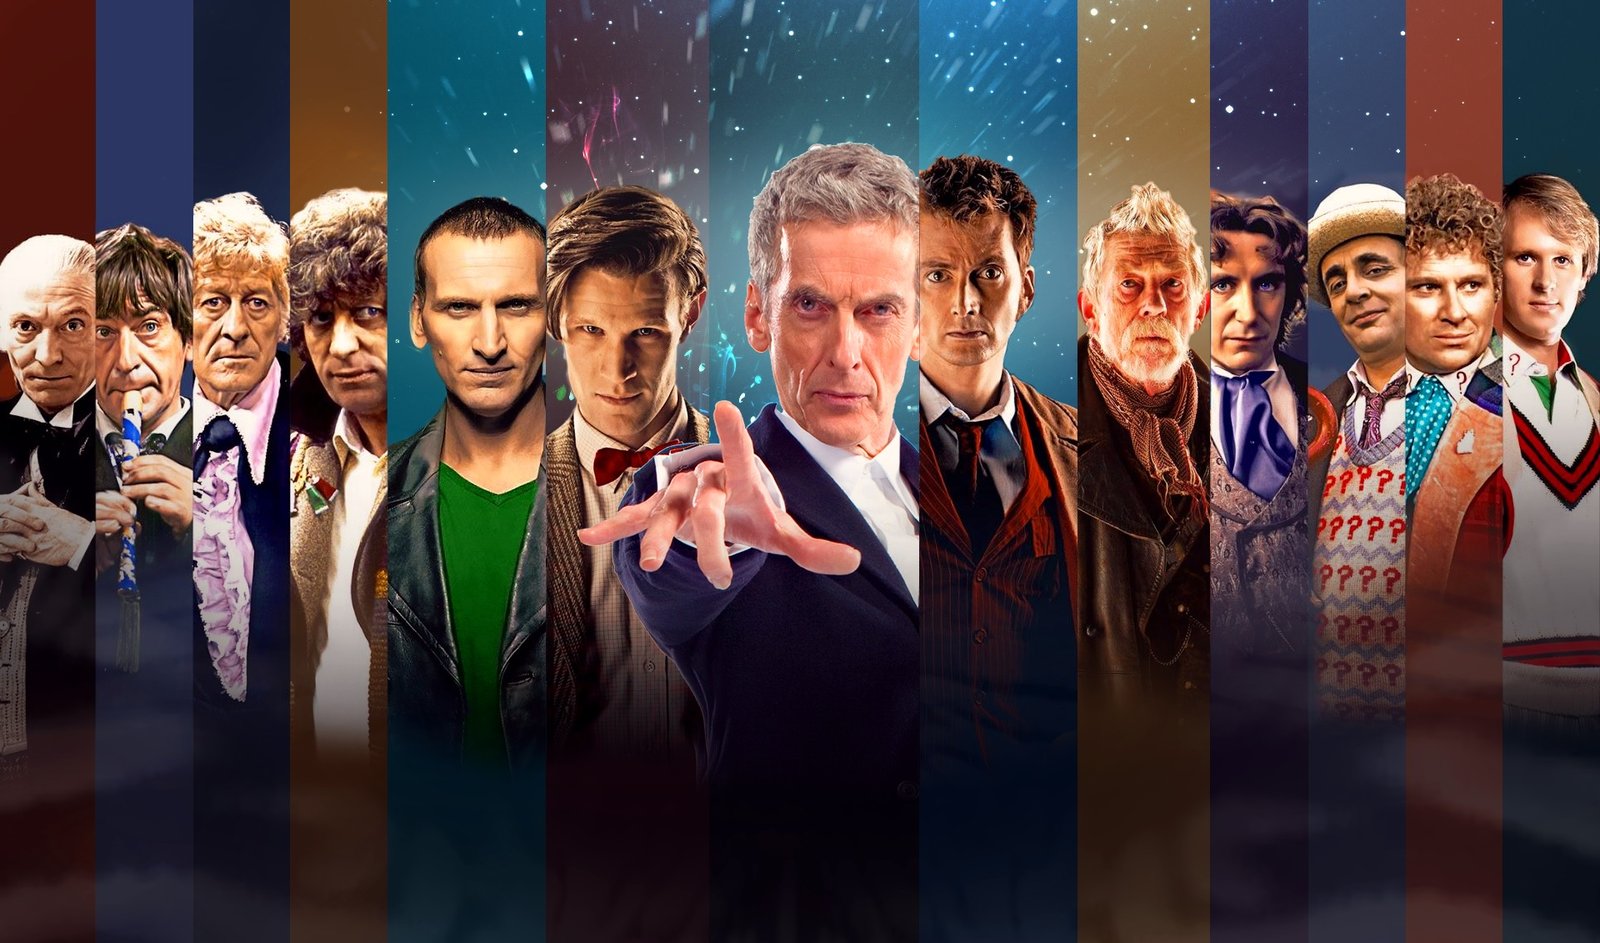 The Greatest TV Show? Radio Times Readers Put Doctor Who in Second Place